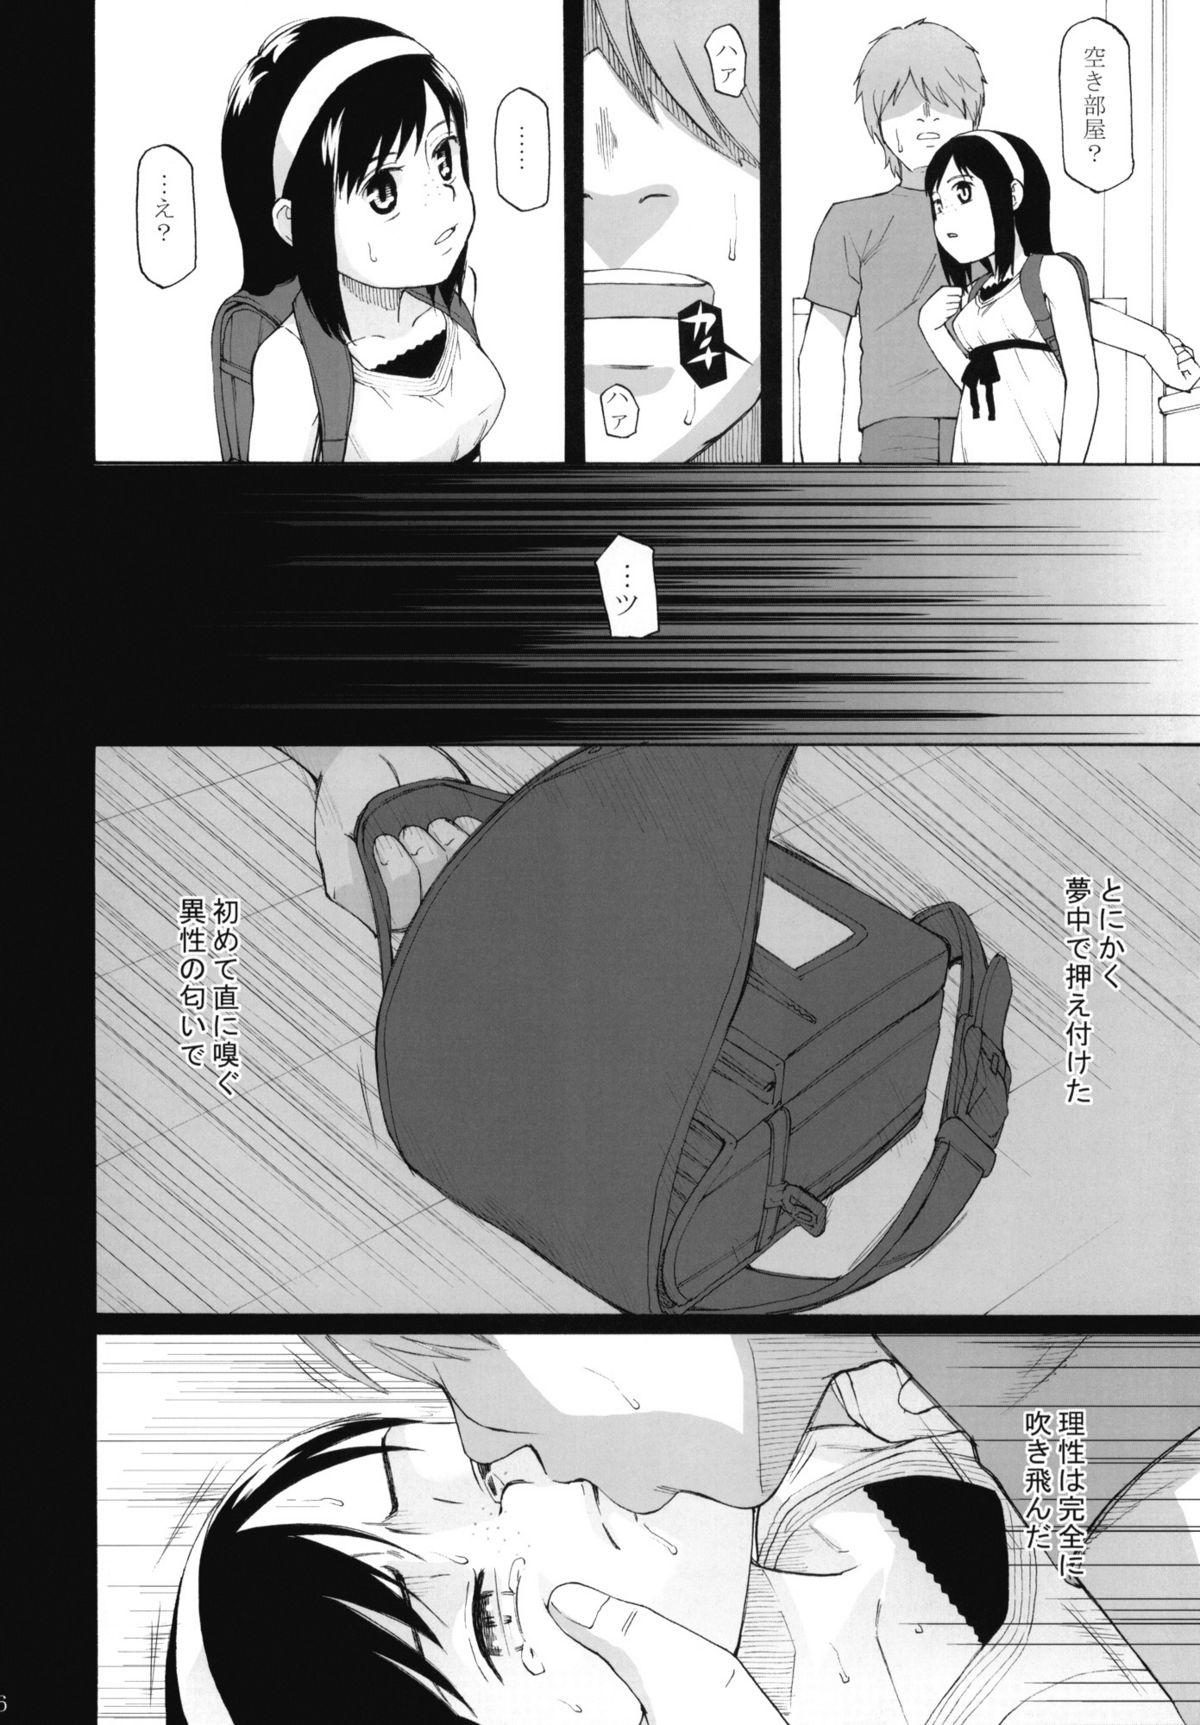 Youth Porn Anemone Shoukougun 1.02 - Anemone Syndrome 1.02 Big Pussy - Page 7